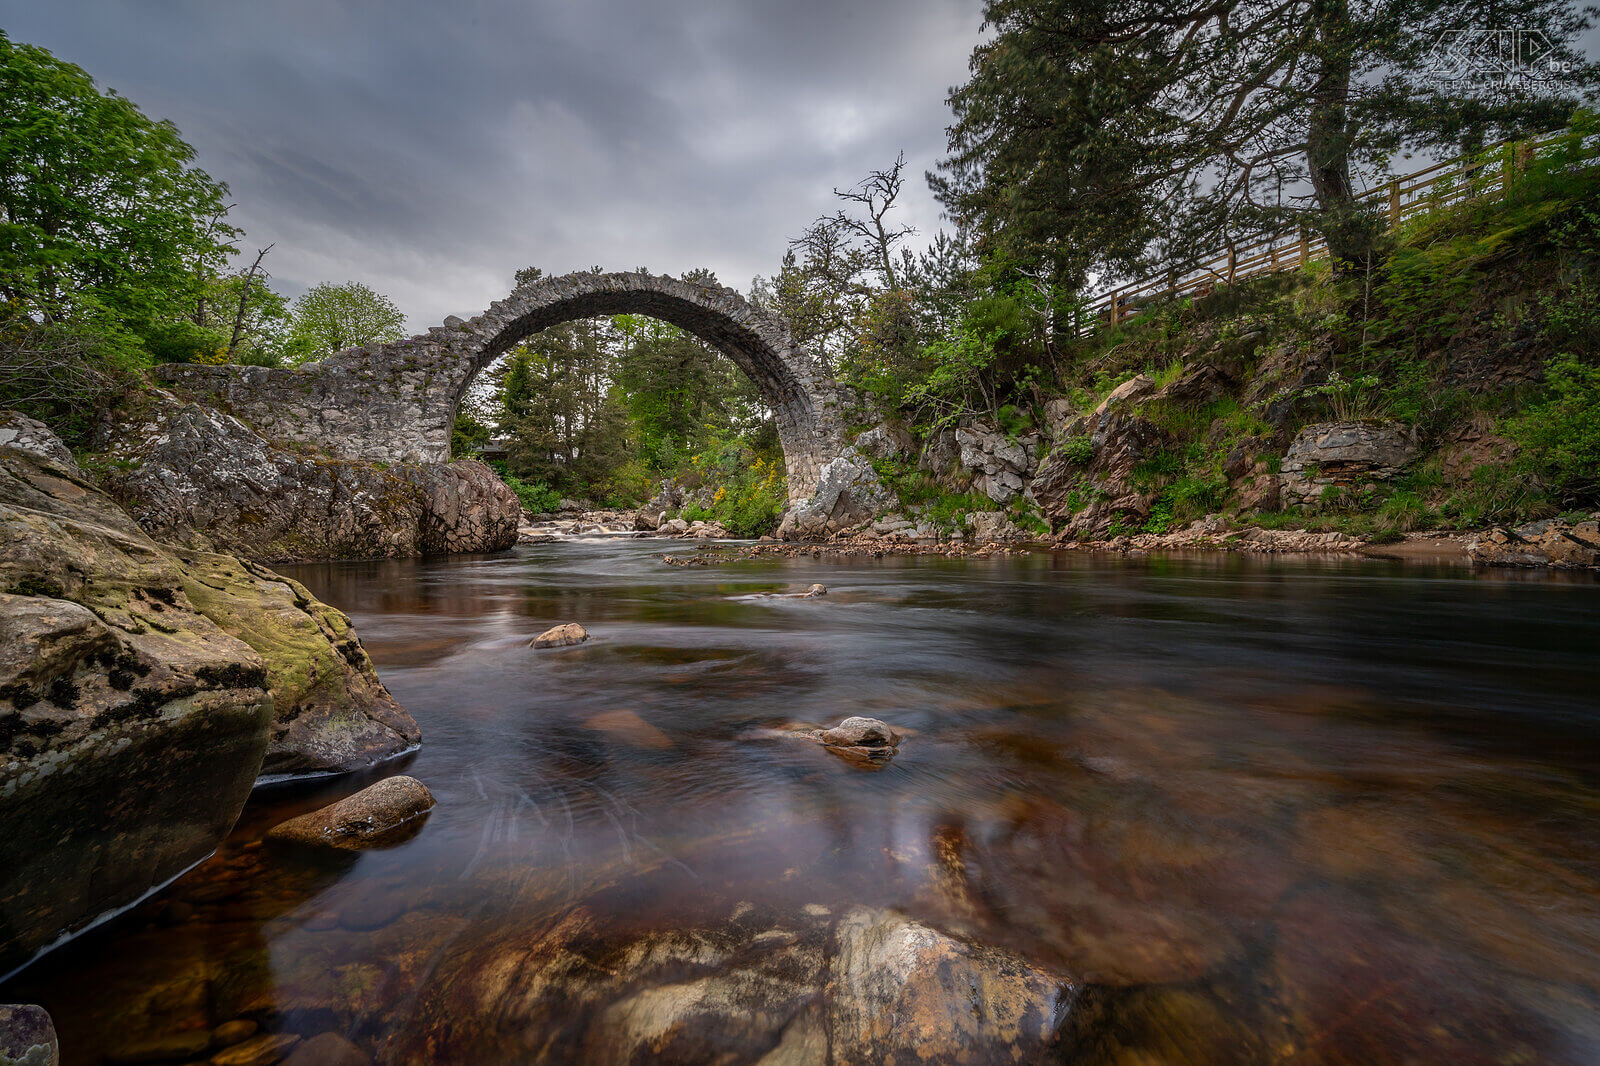 Carrbridge - Old Pack Horse Bridge Carrbridge is a village about 10 kilometers north of Aviemore and is part of Cairngorms National Park. The name Carrbridge comes from the Old Pack Horse Bridge built in 1717 Stefan Cruysberghs